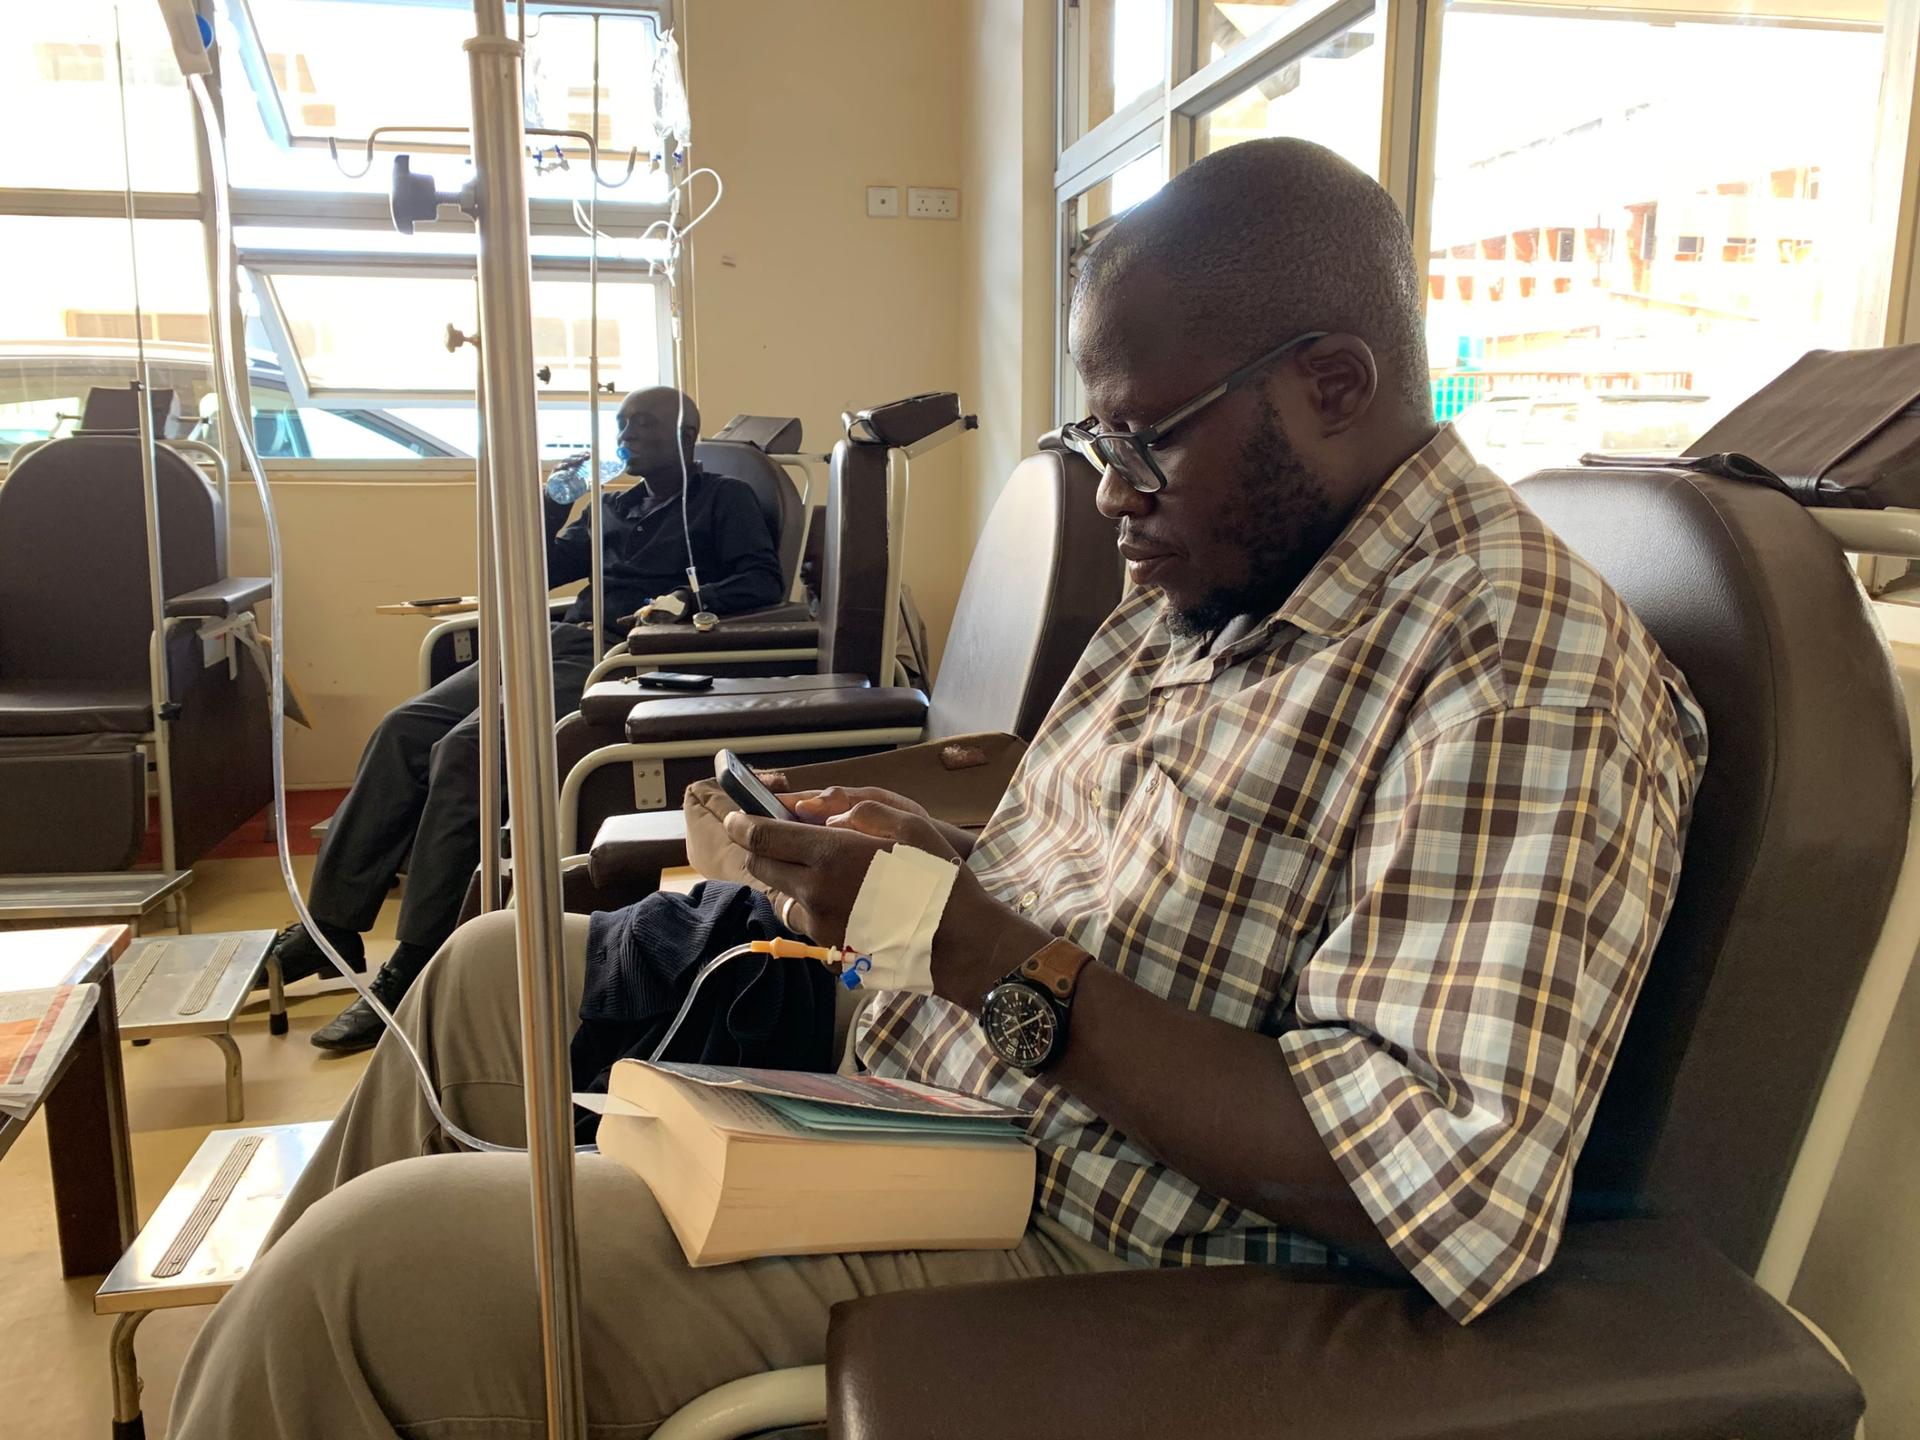 Muchimba Kabeta gets infusions of Rituximab twice a year to help prevent flares of his multiple sclerosis. After starting treatment, he has not had a flare since.